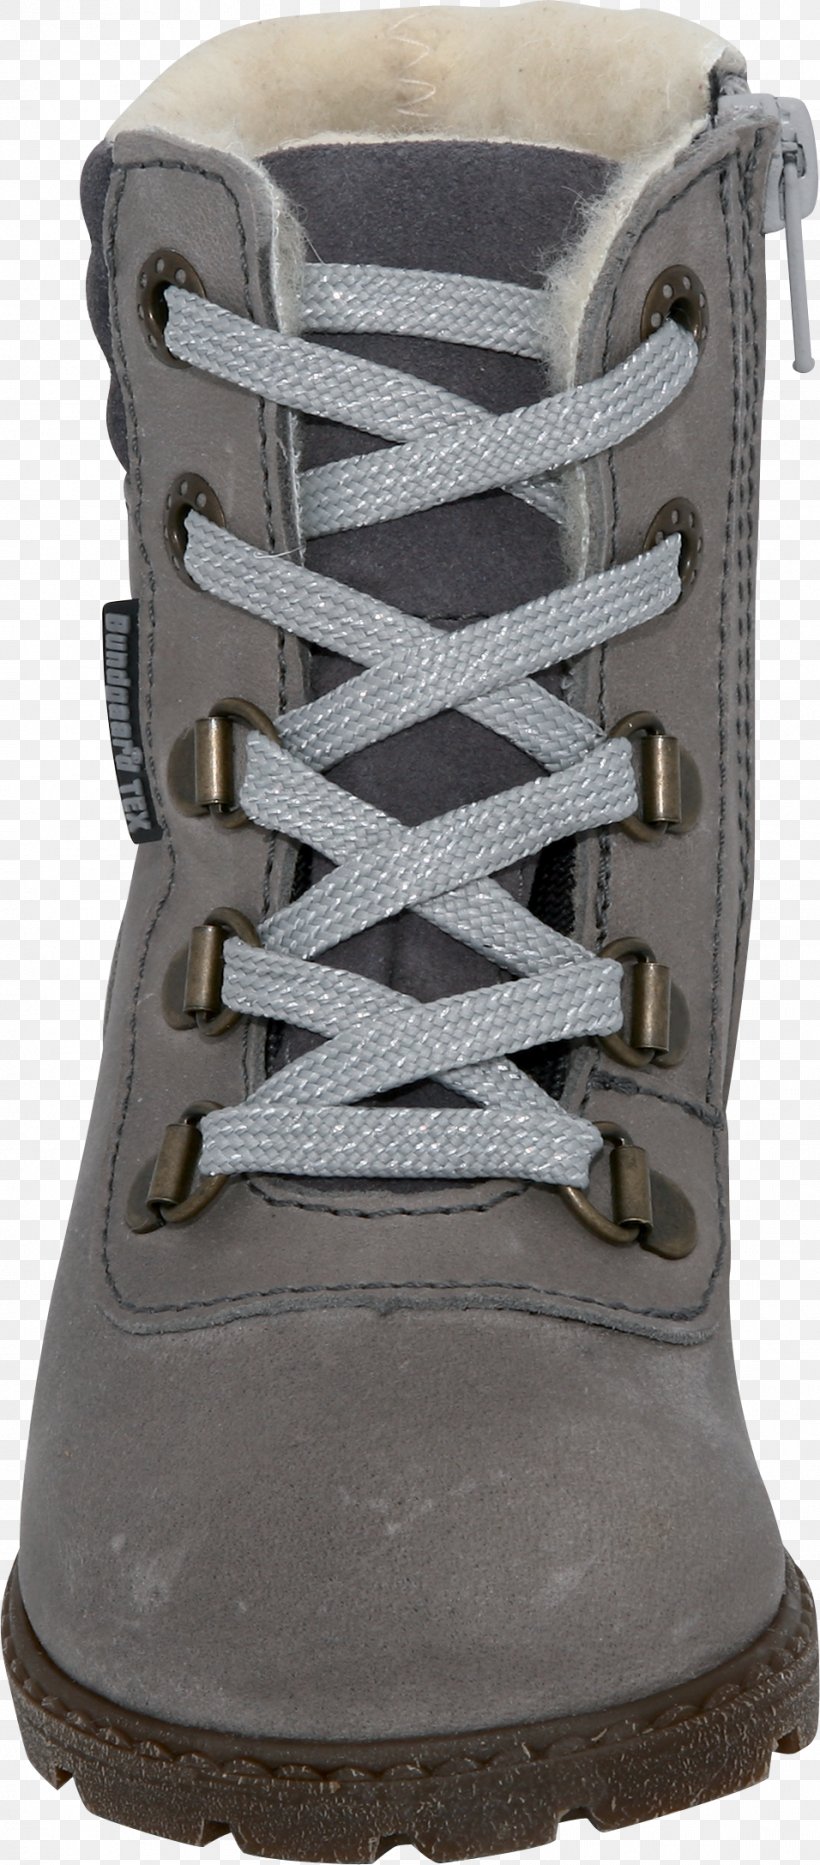 Snow Boot Shoe, PNG, 956x2175px, Snow Boot, Boot, Footwear, Outdoor Shoe, Shoe Download Free